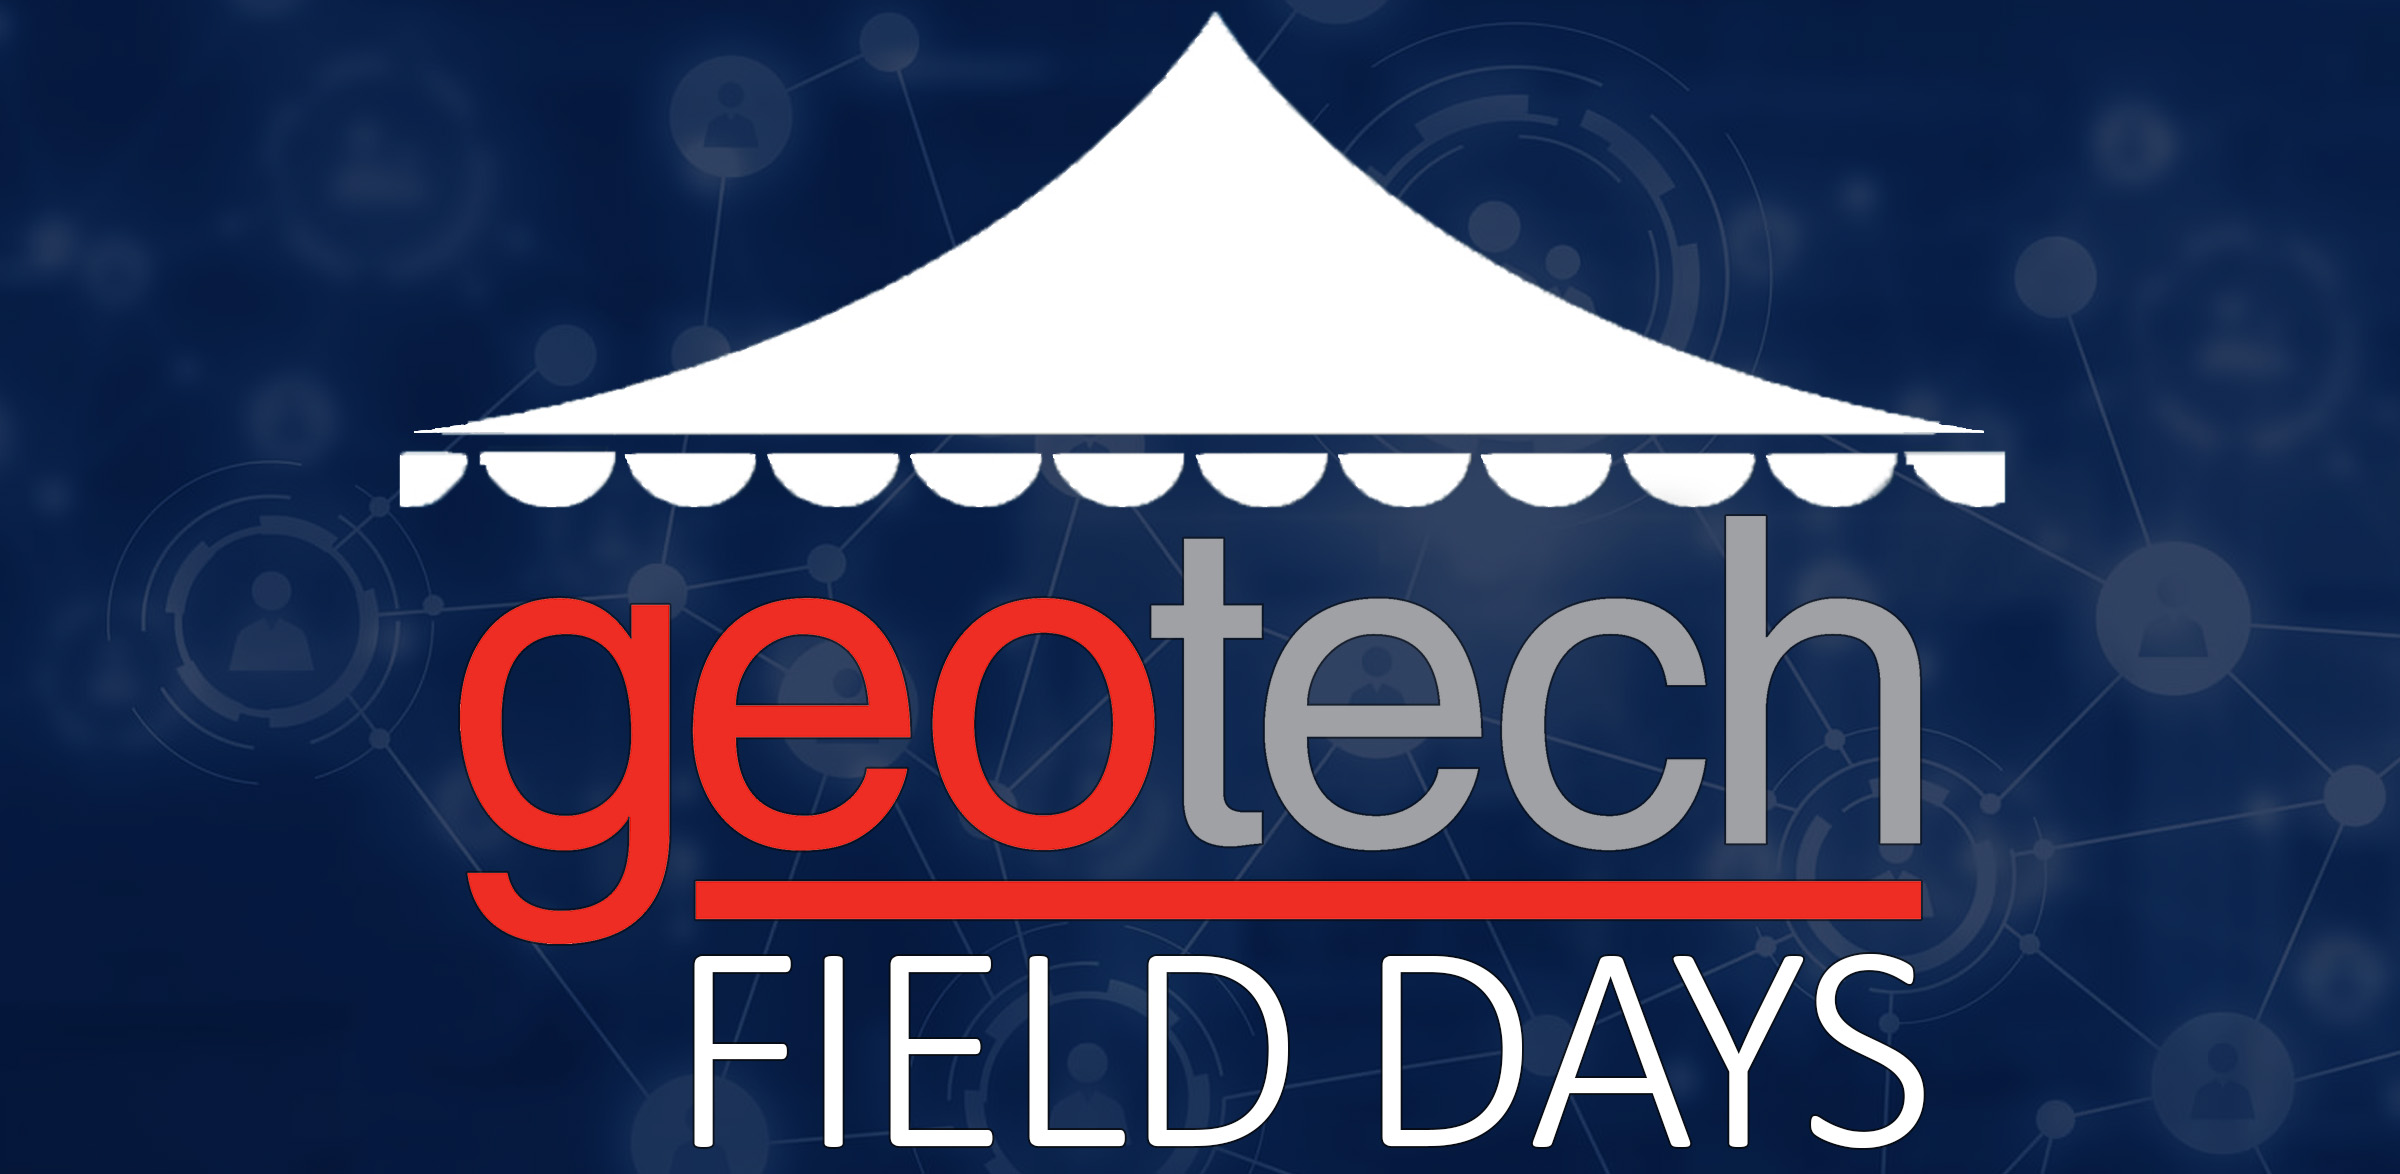 field days logo, a tent above the Geotech logo and the words Annual Field Days. In the background is a web with circles connecting to each other to symbolize networking